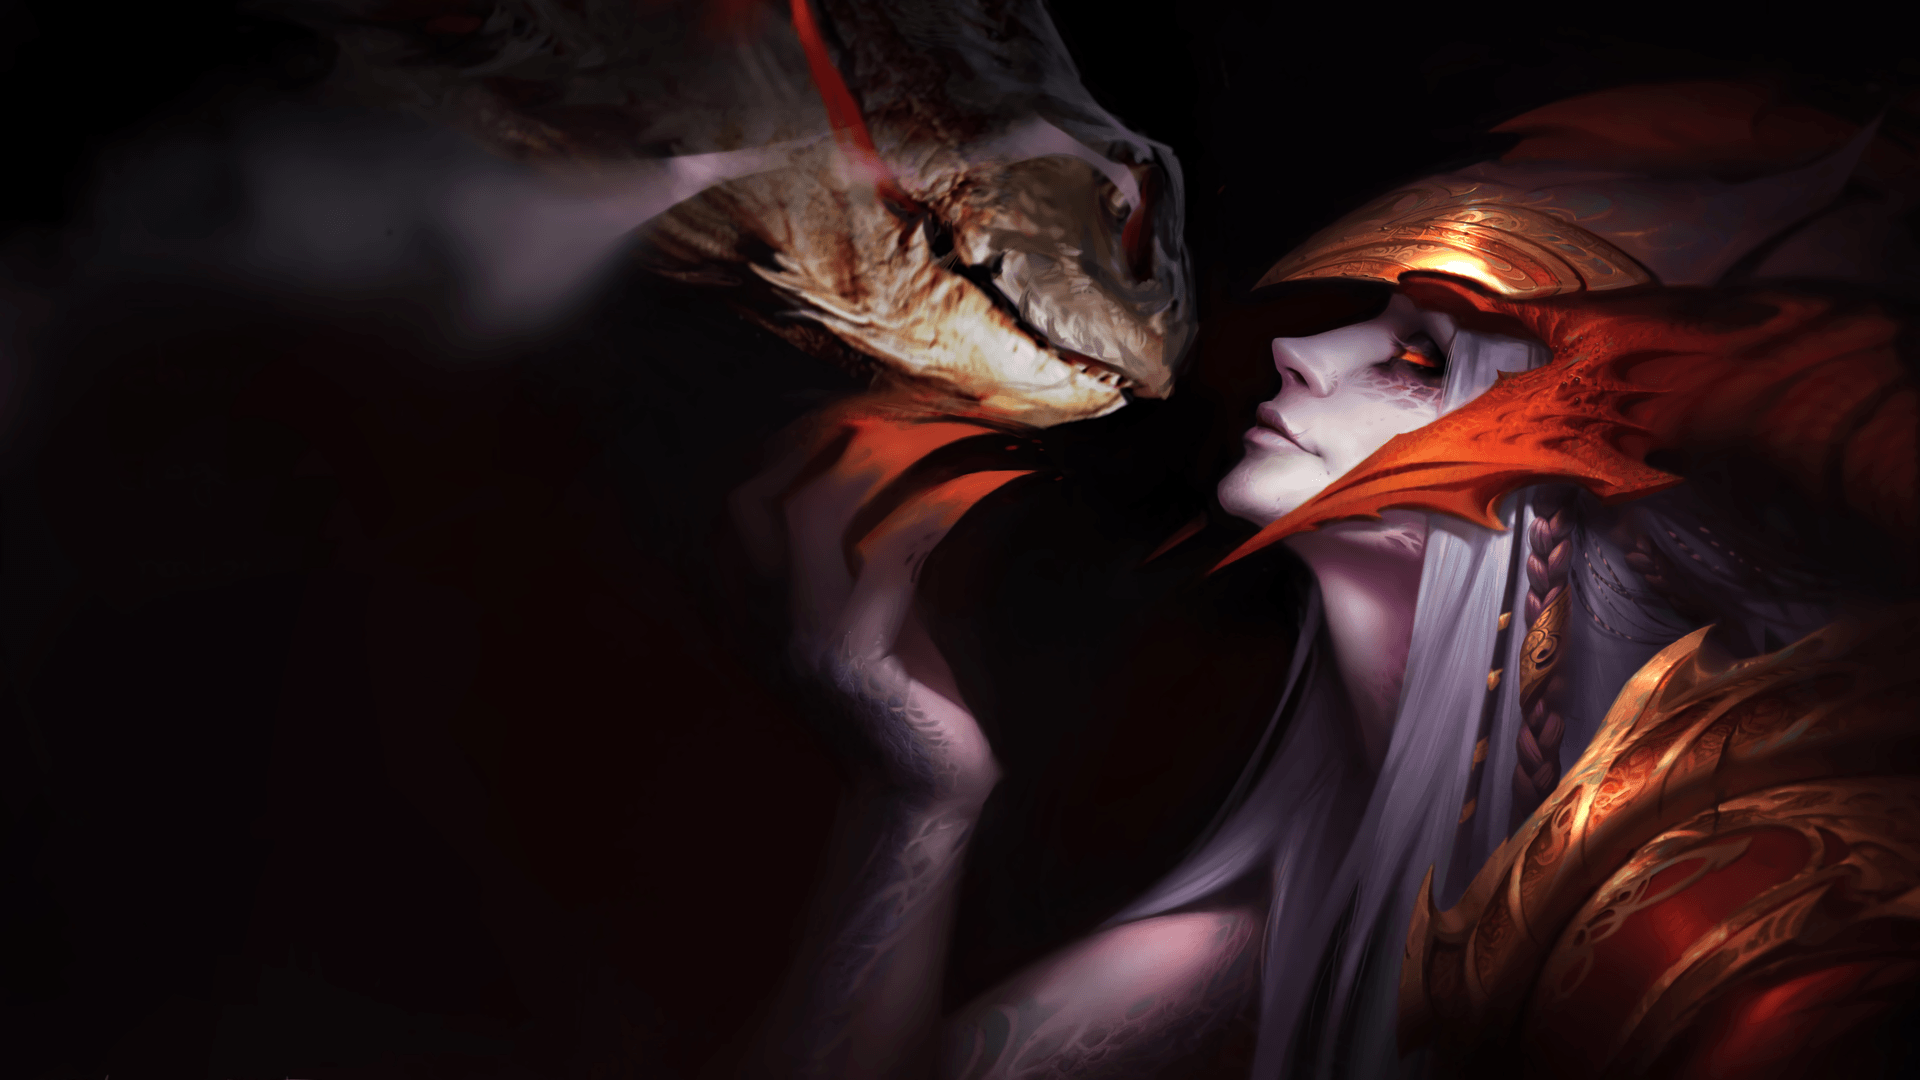 Shyvana League Of Legends 4k Wallpapers Top Free Shyvana League Of